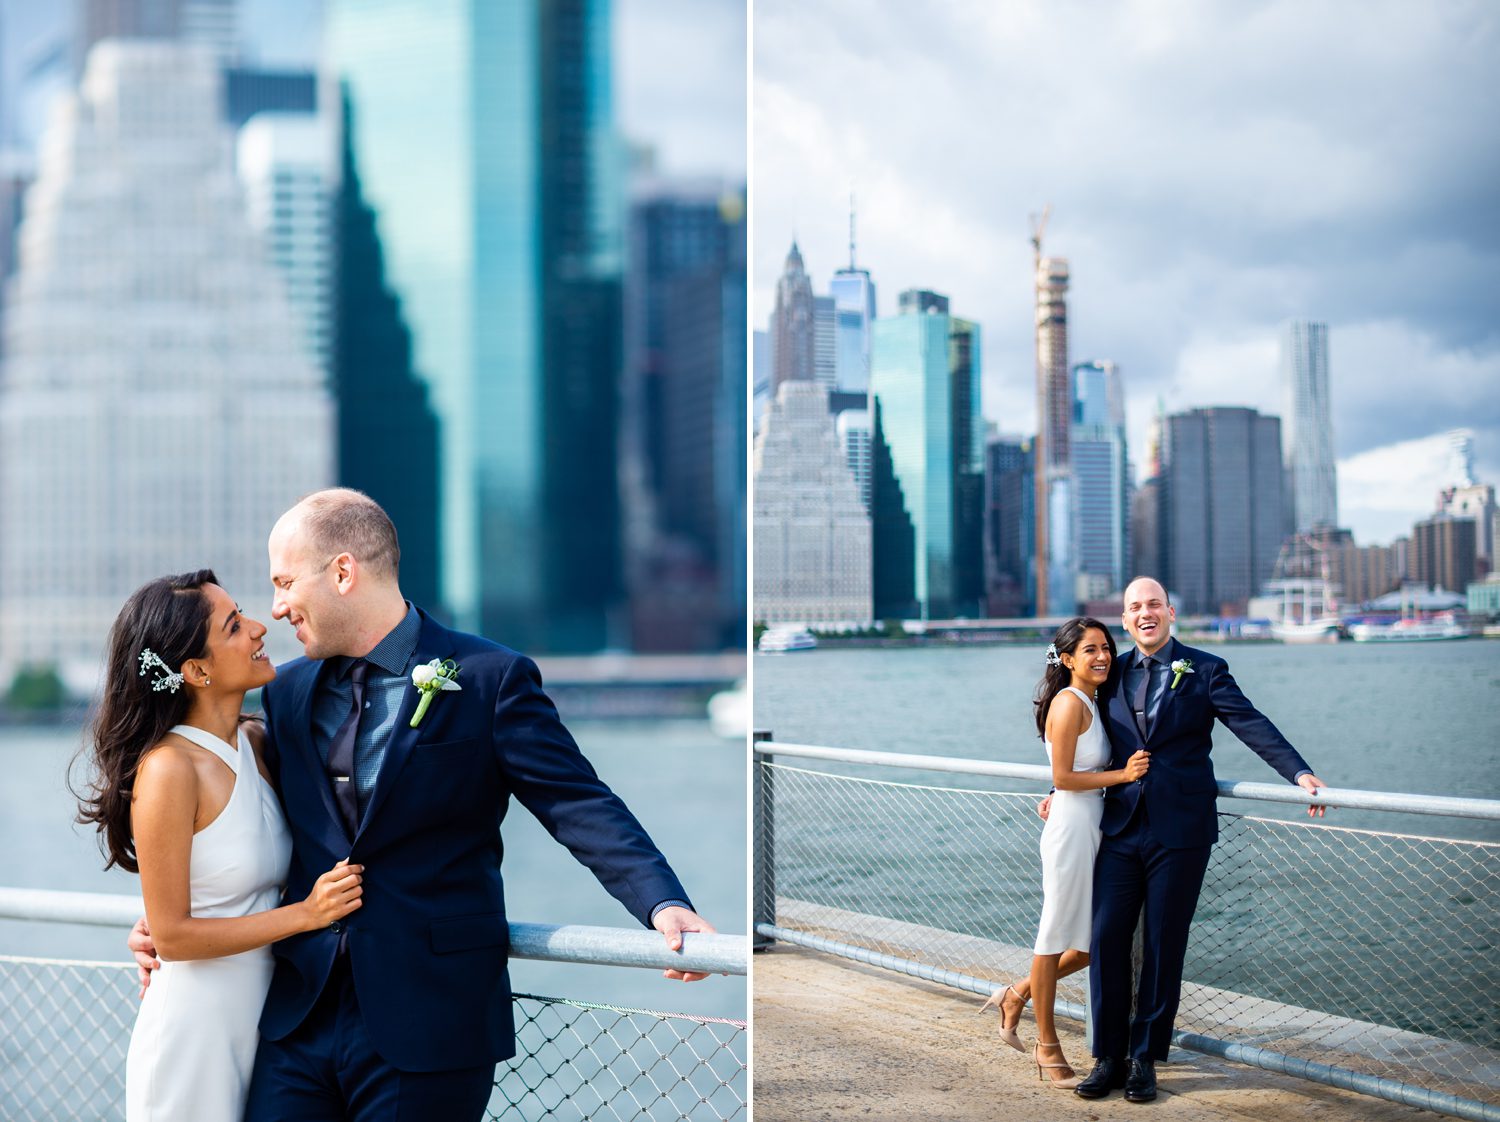 Where to Get Married in New York